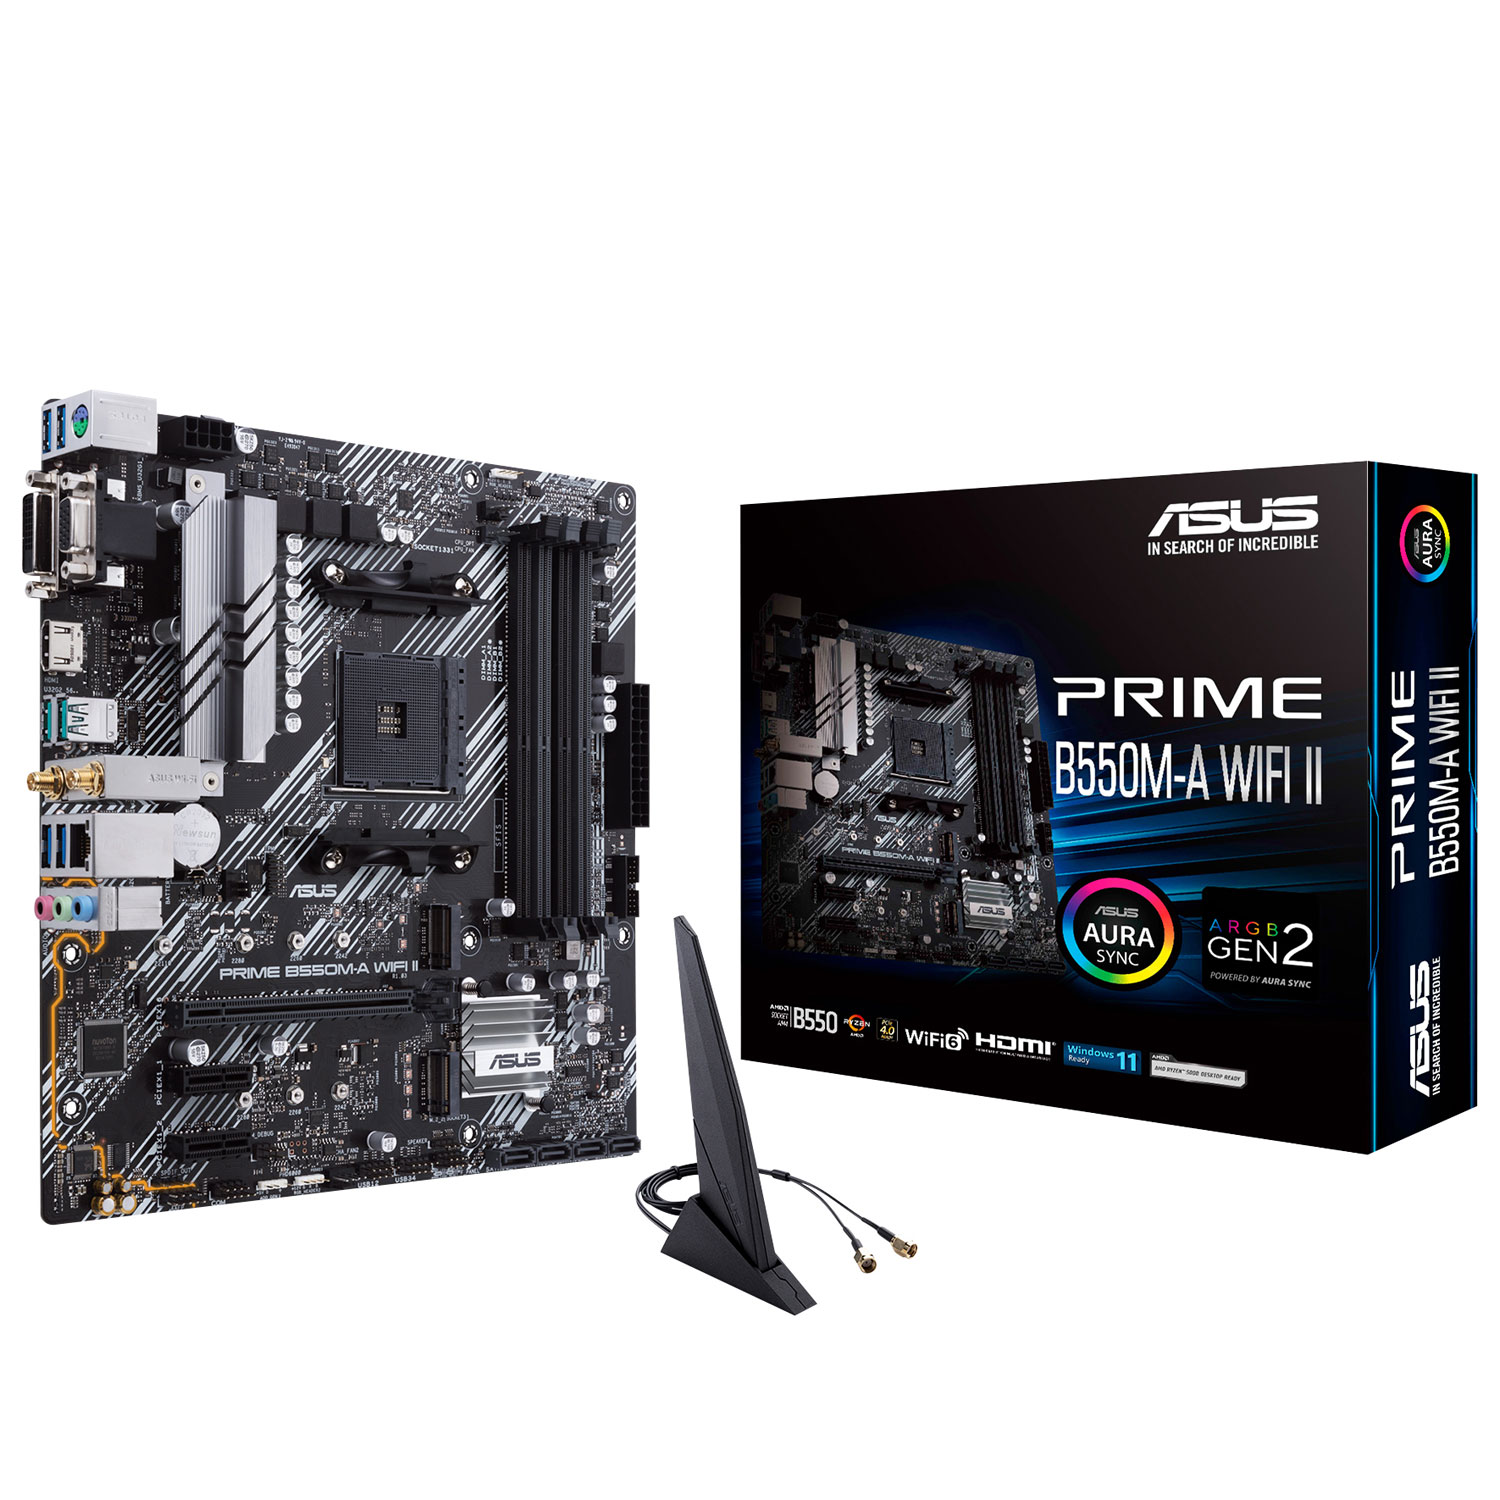 ASUS Prime B550M-A Wi-Fi II Micro-ATX AM4 Motherboard for AMD Ryzen 3000/4000/5000 Series CPUs